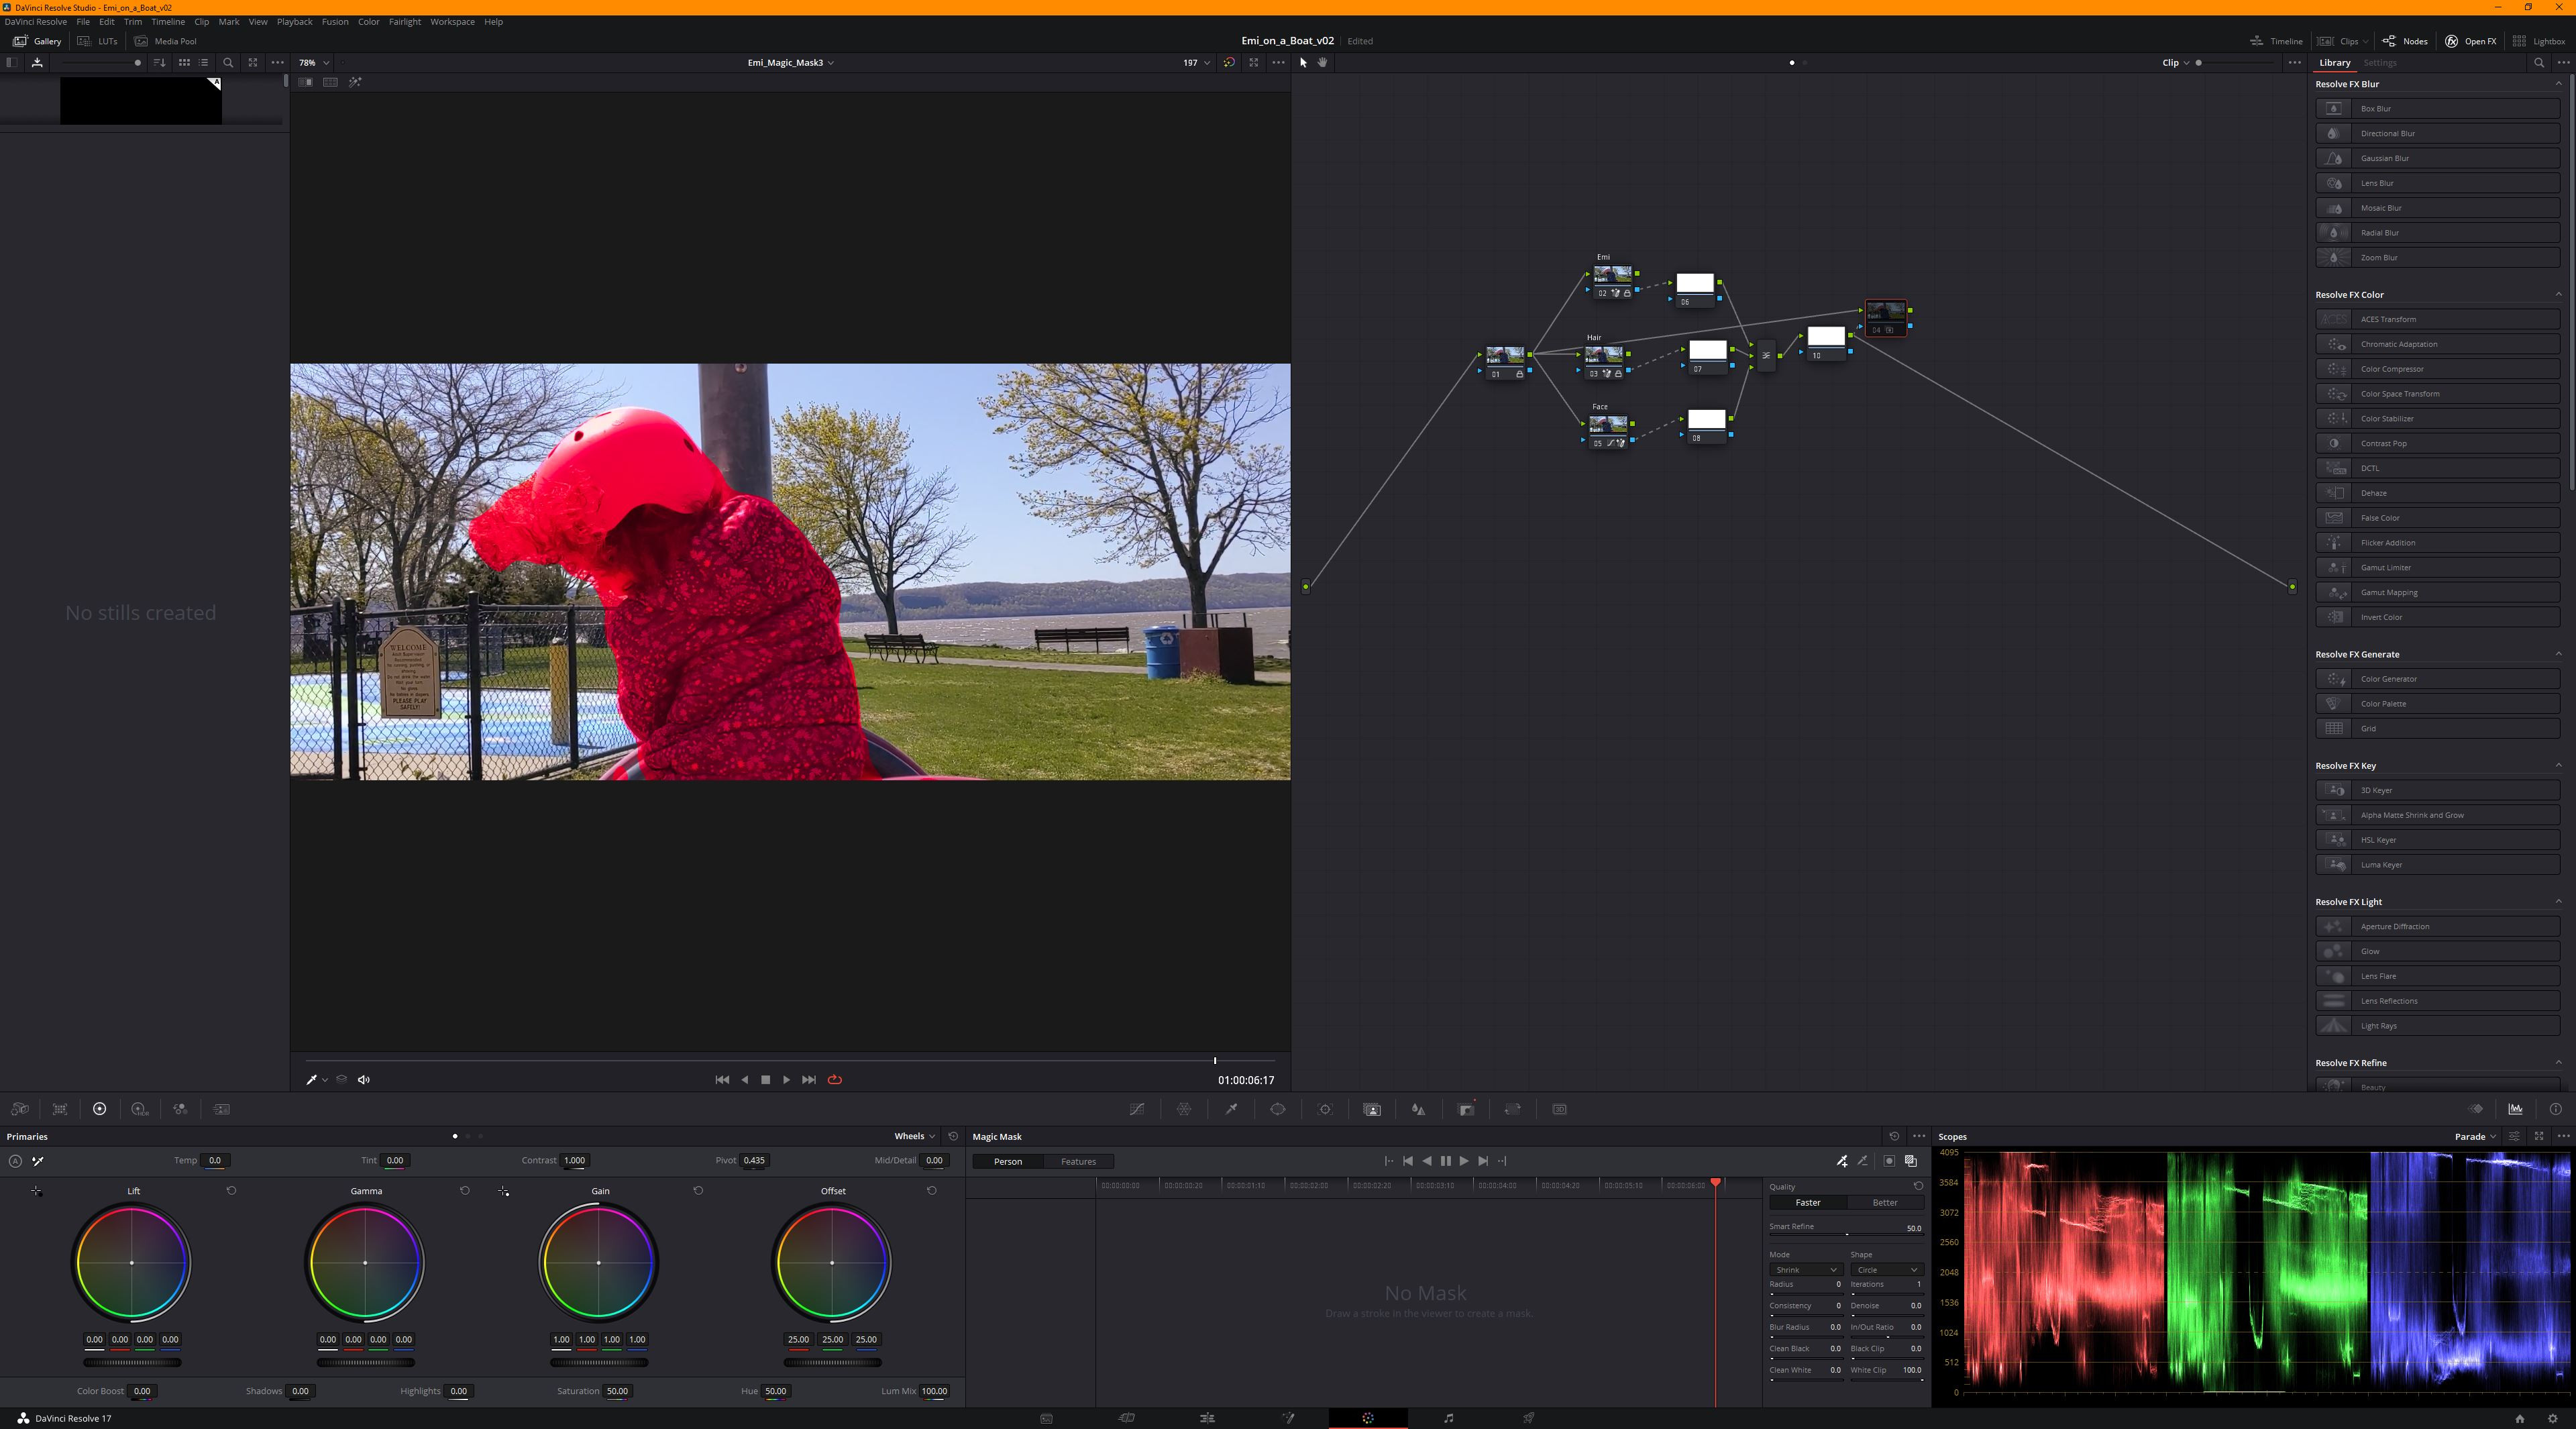 The MagicMask in Resolve is bananas. I got a really decent garbage matte out of it. I only caught wind of it after a bit of trial and error, but I will definitely be giving this a more intense inspection down the road.